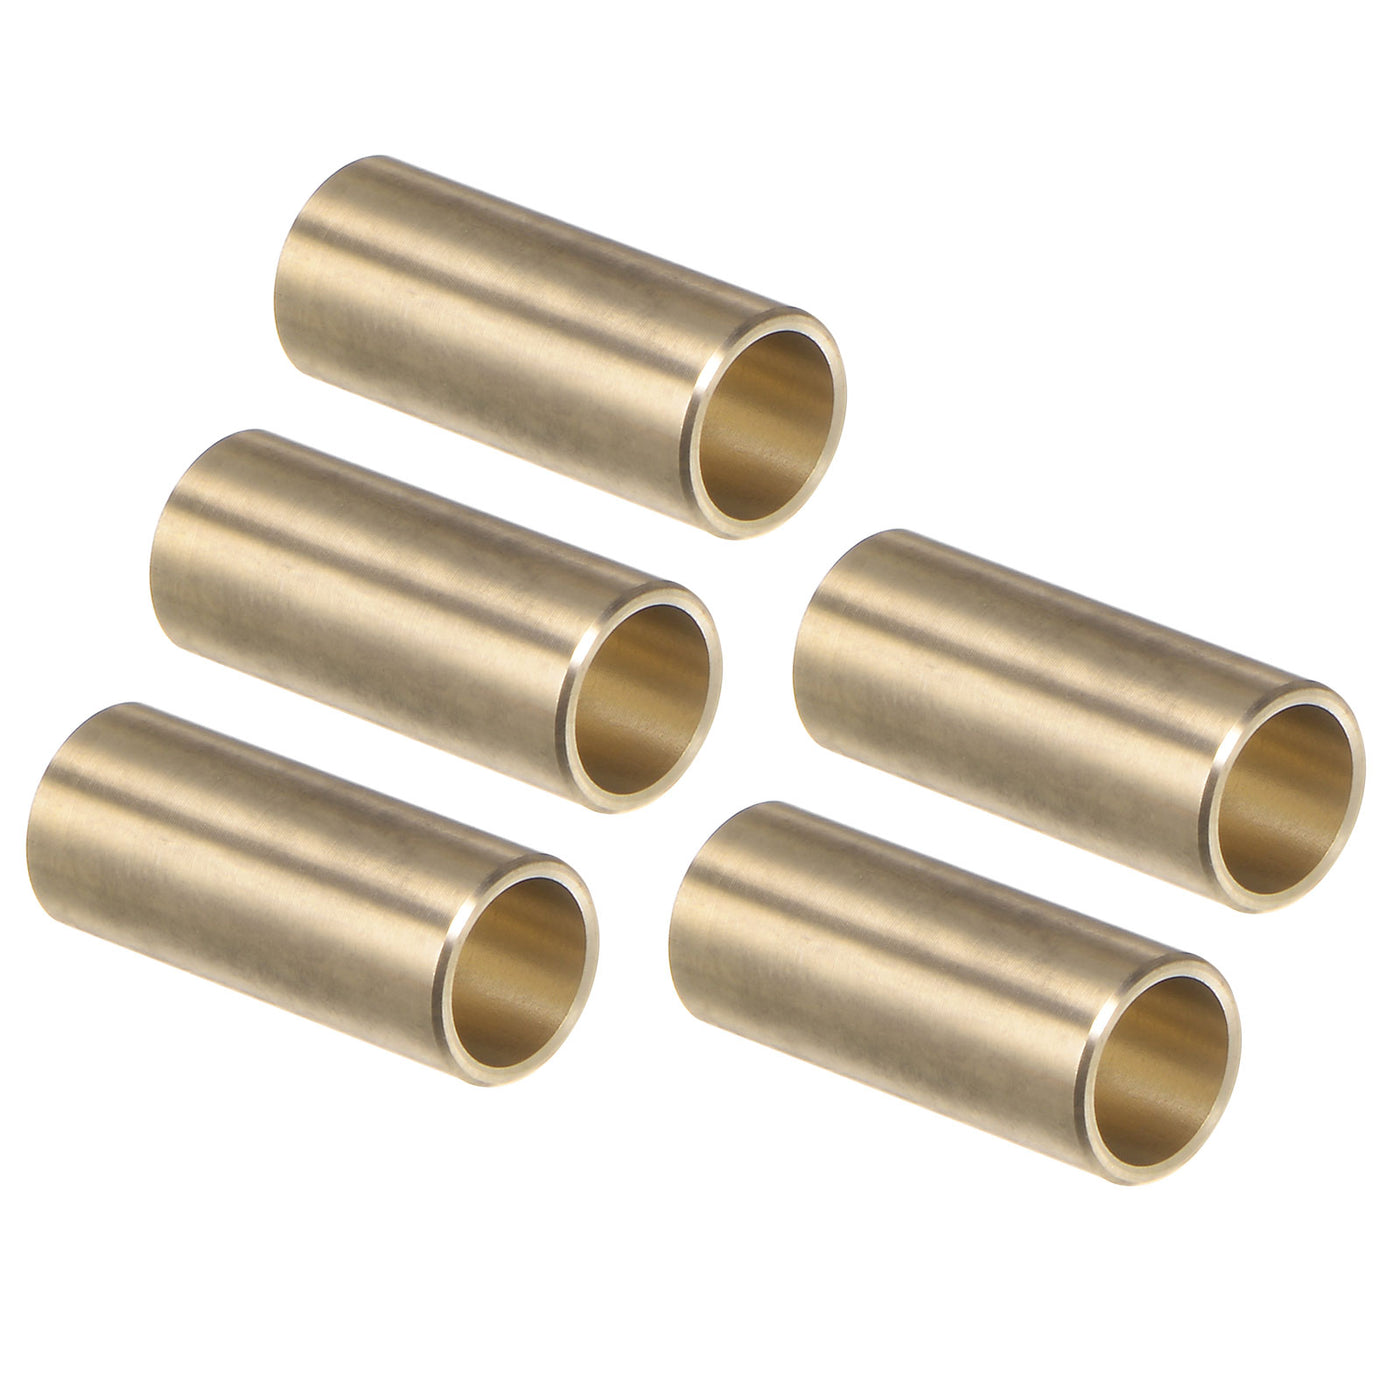 uxcell Uxcell 5pcs Sleeve Bearings 1/4" x 5/16" x 3/4" Wrapped Oilless Bushings Cast Brass